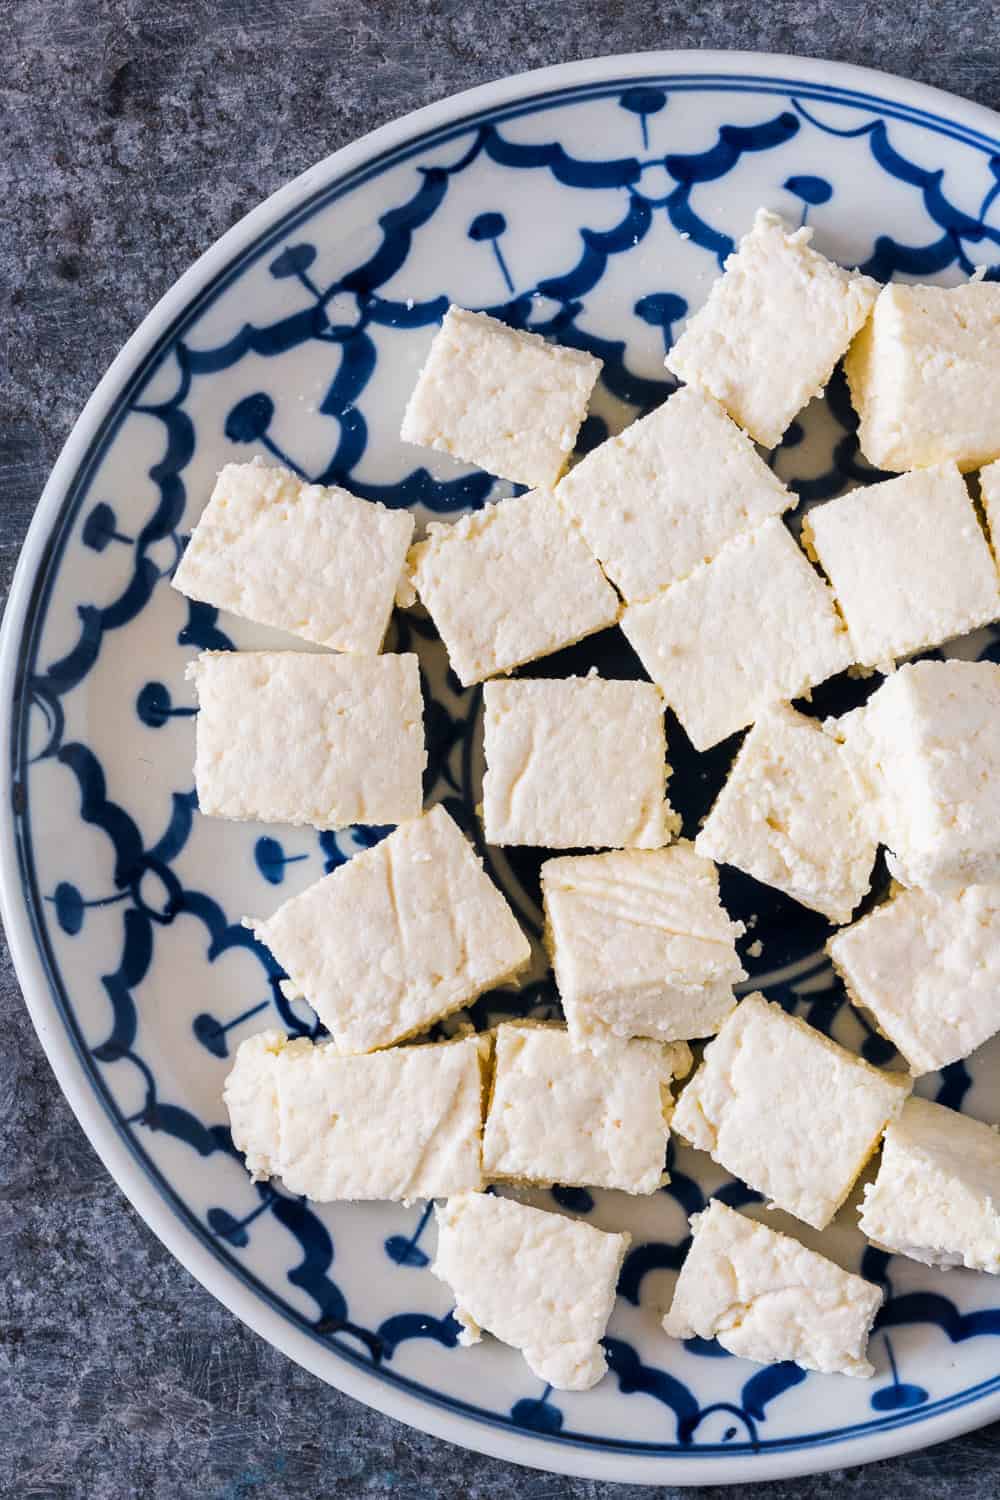 Here's step by step instructions to make homemade Indian paneer (cottage cheese) in just 15 minutes. The next time you want to make saag paneer, palak paneer, makhani, tikka or matar paneer, don't buy store bought and just make this at home with 2 ingredients. 